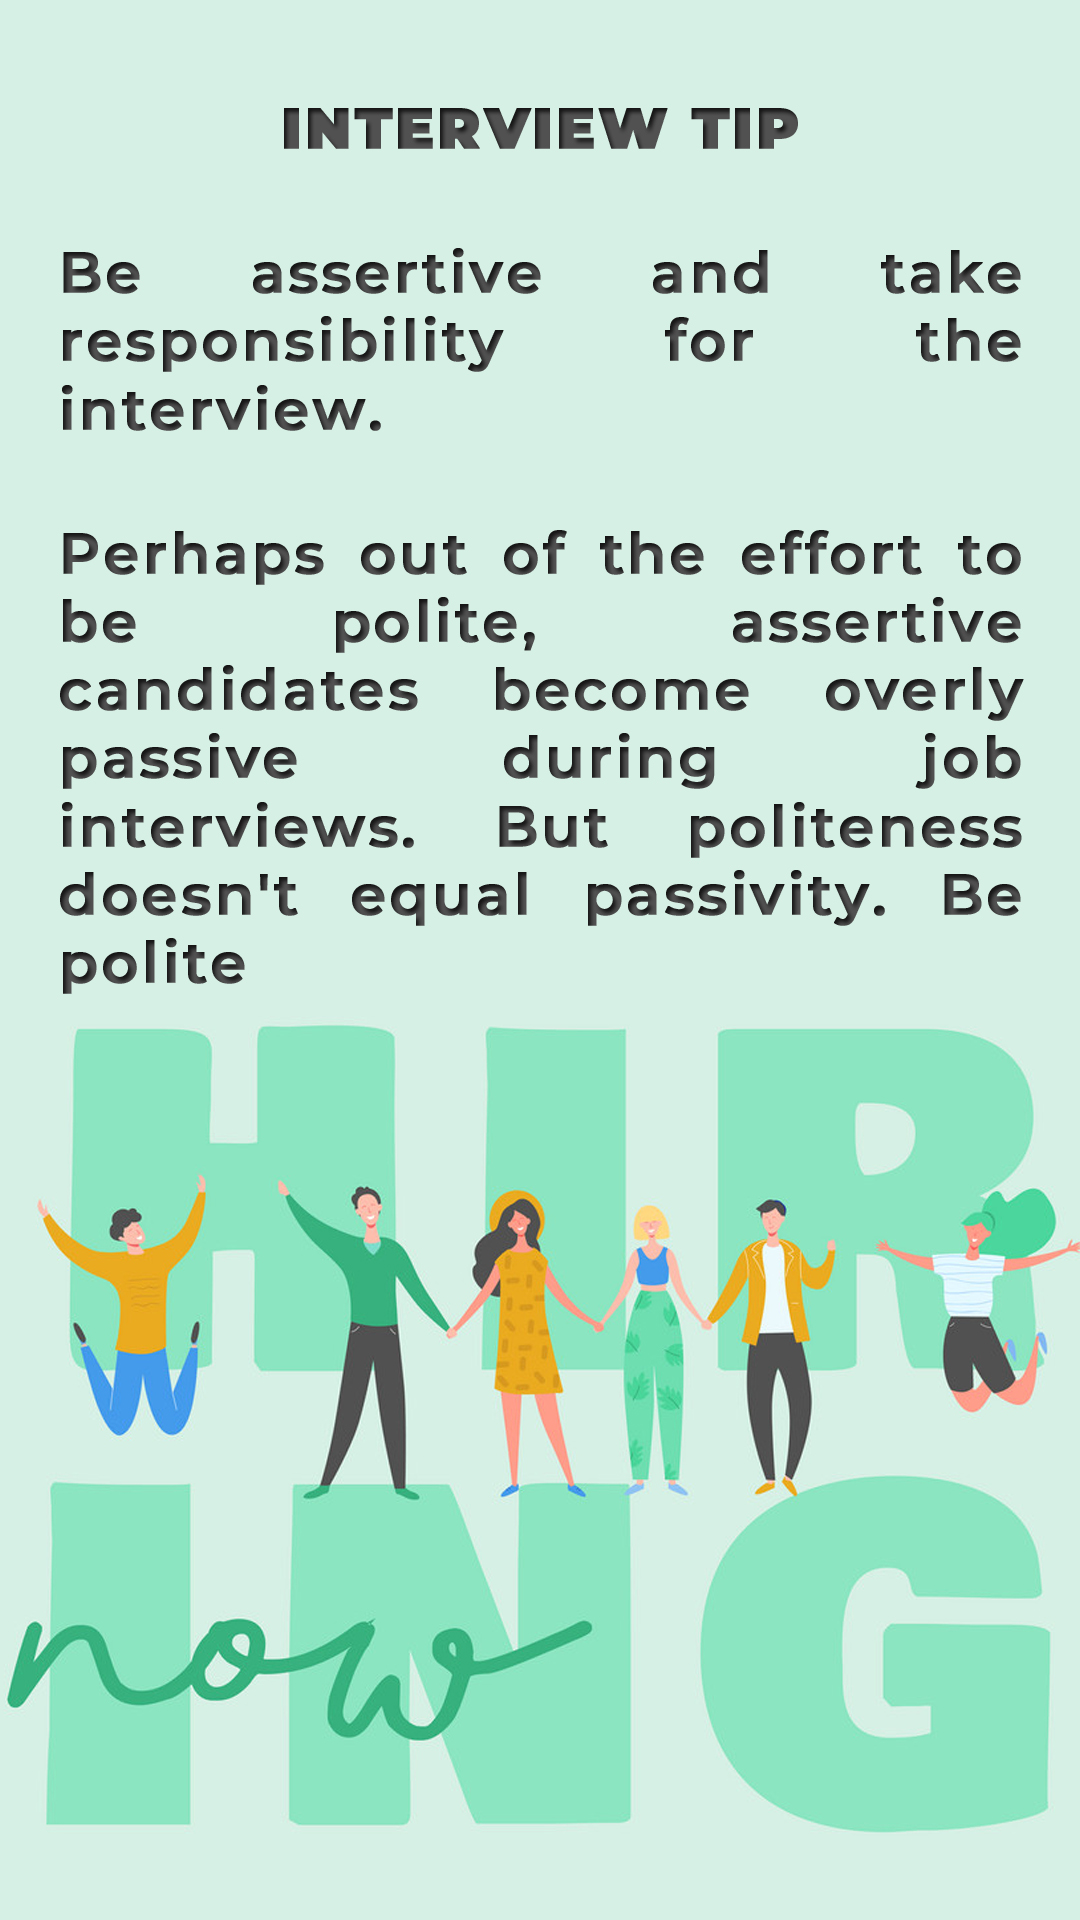 Be assertive and take responsibility for the interview